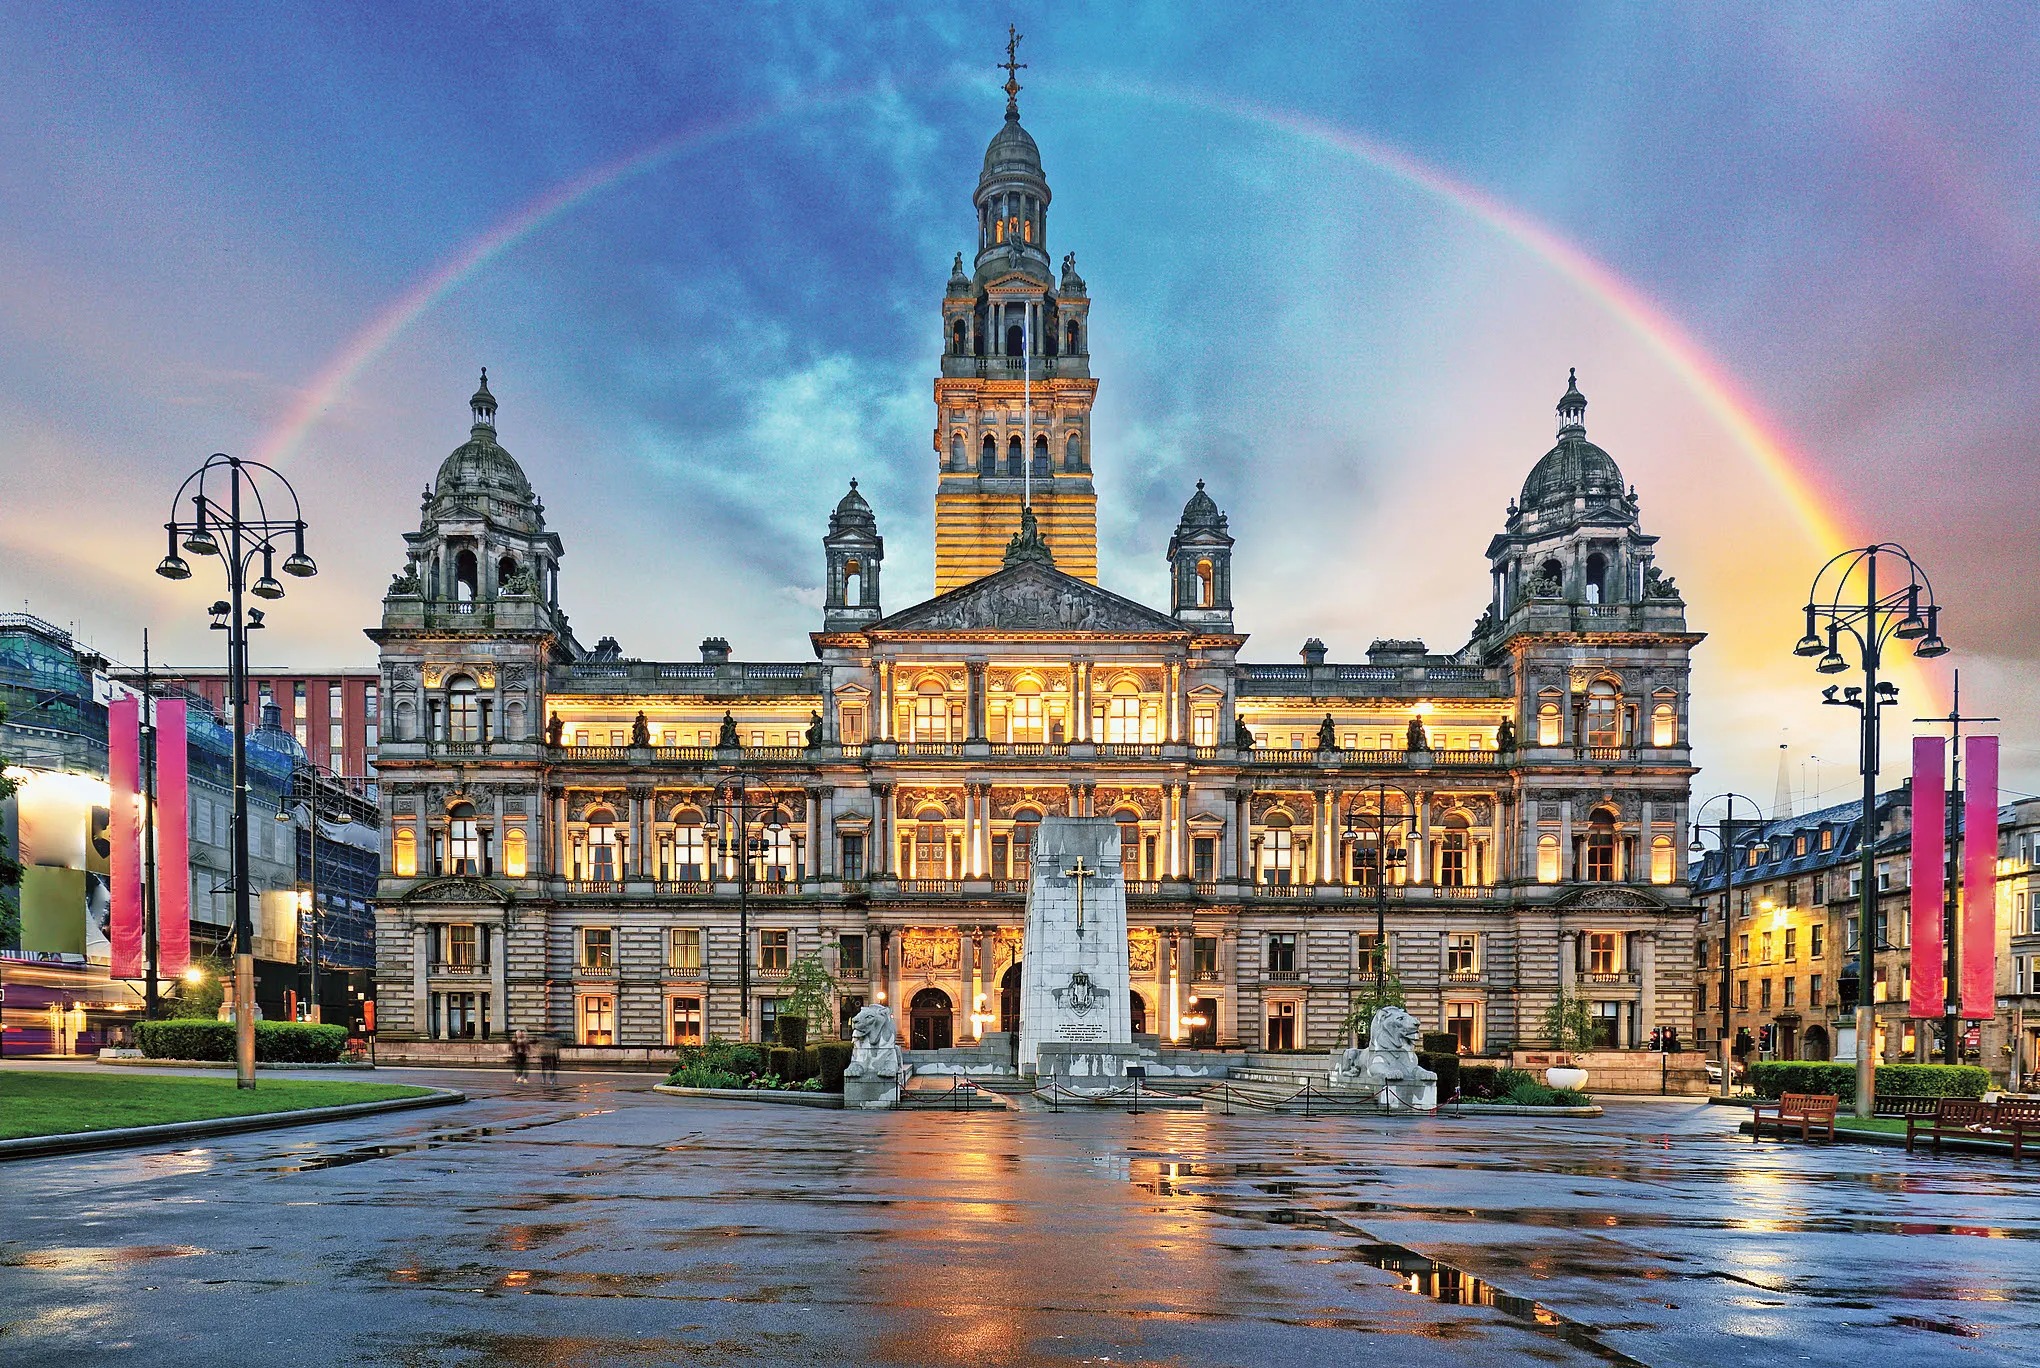 Rainbow over Glasgow City Chambers and George Square